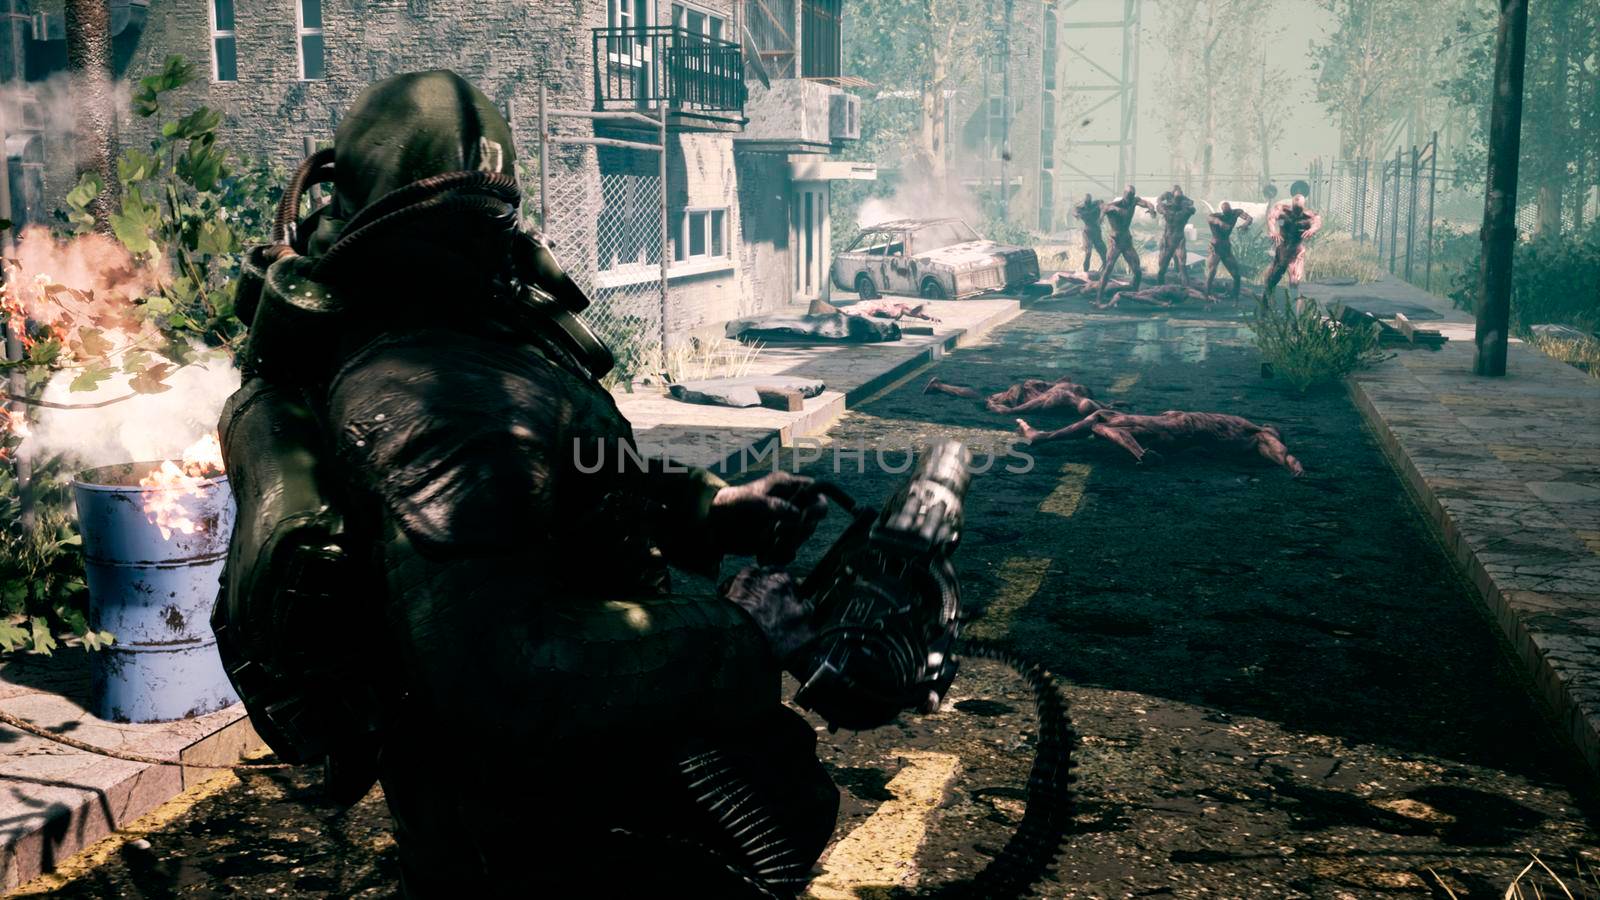 The last survivor of the Apocalypse shoots nightmarish zombies with a machine gun in a deserted city.